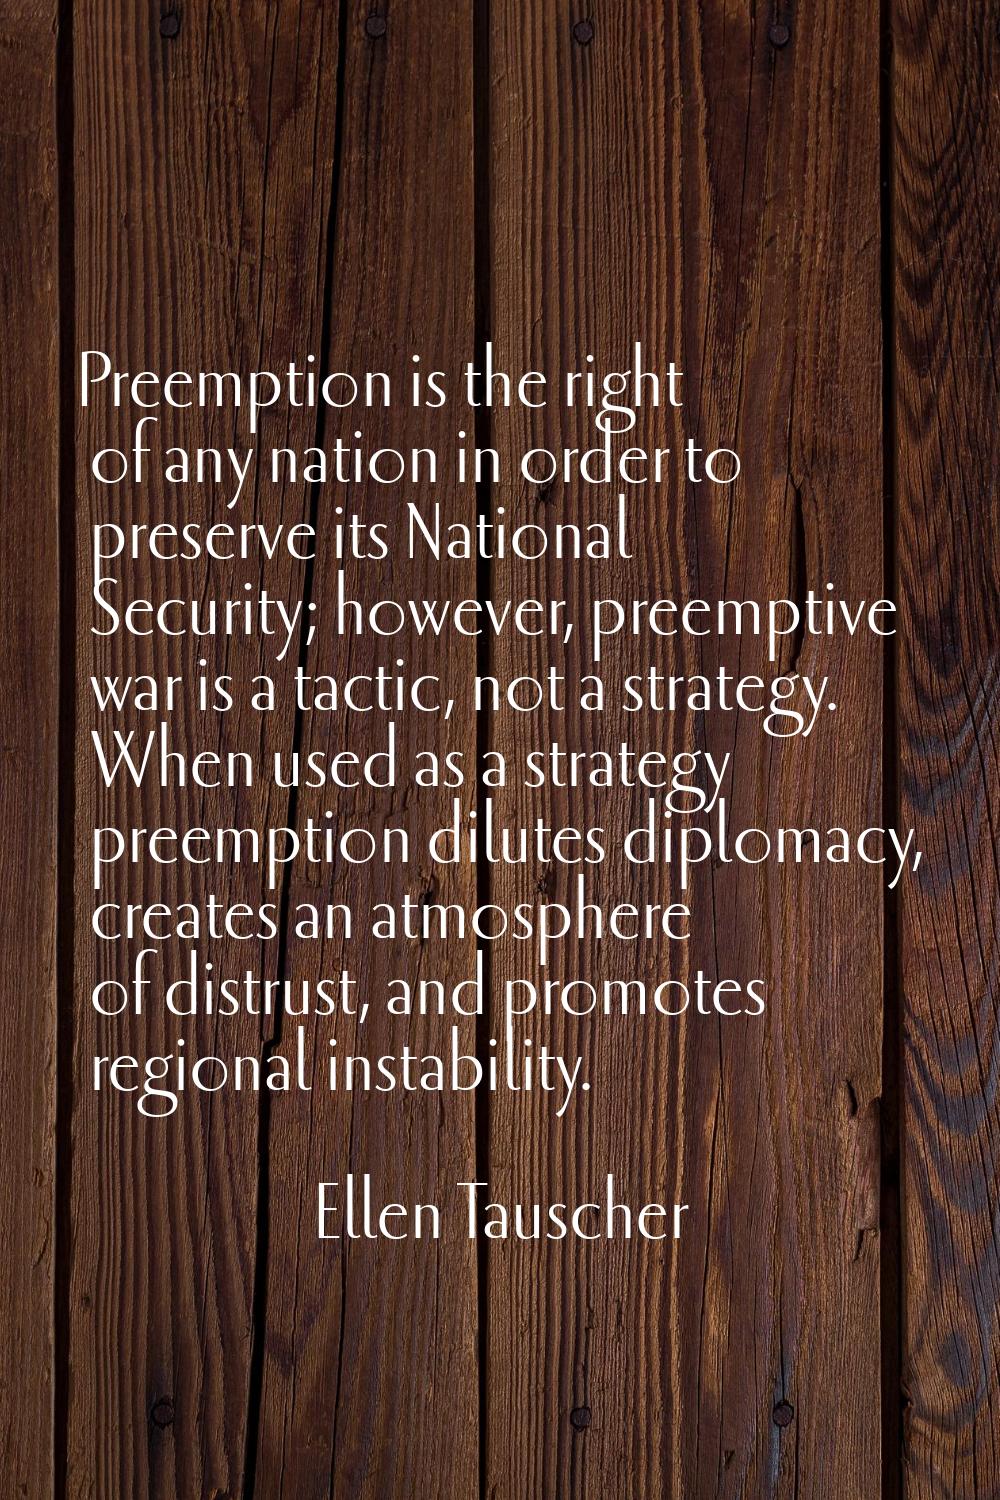 Preemption is the right of any nation in order to preserve its National Security; however, preempti